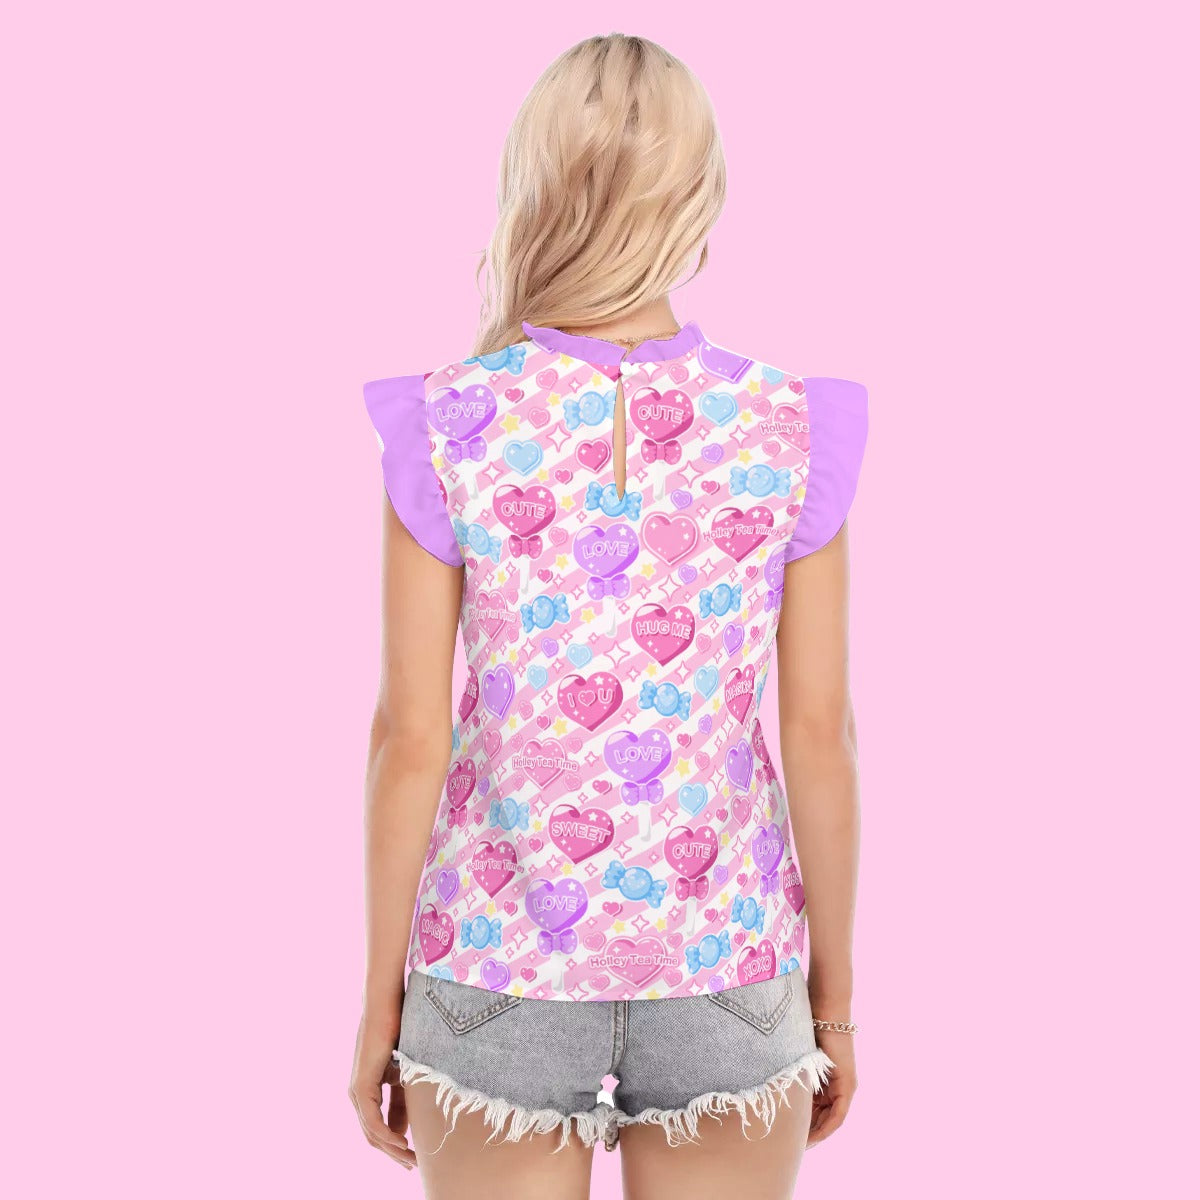 Candy Love Hearts (Colorful Cutie) Women's Ruffle Blouse